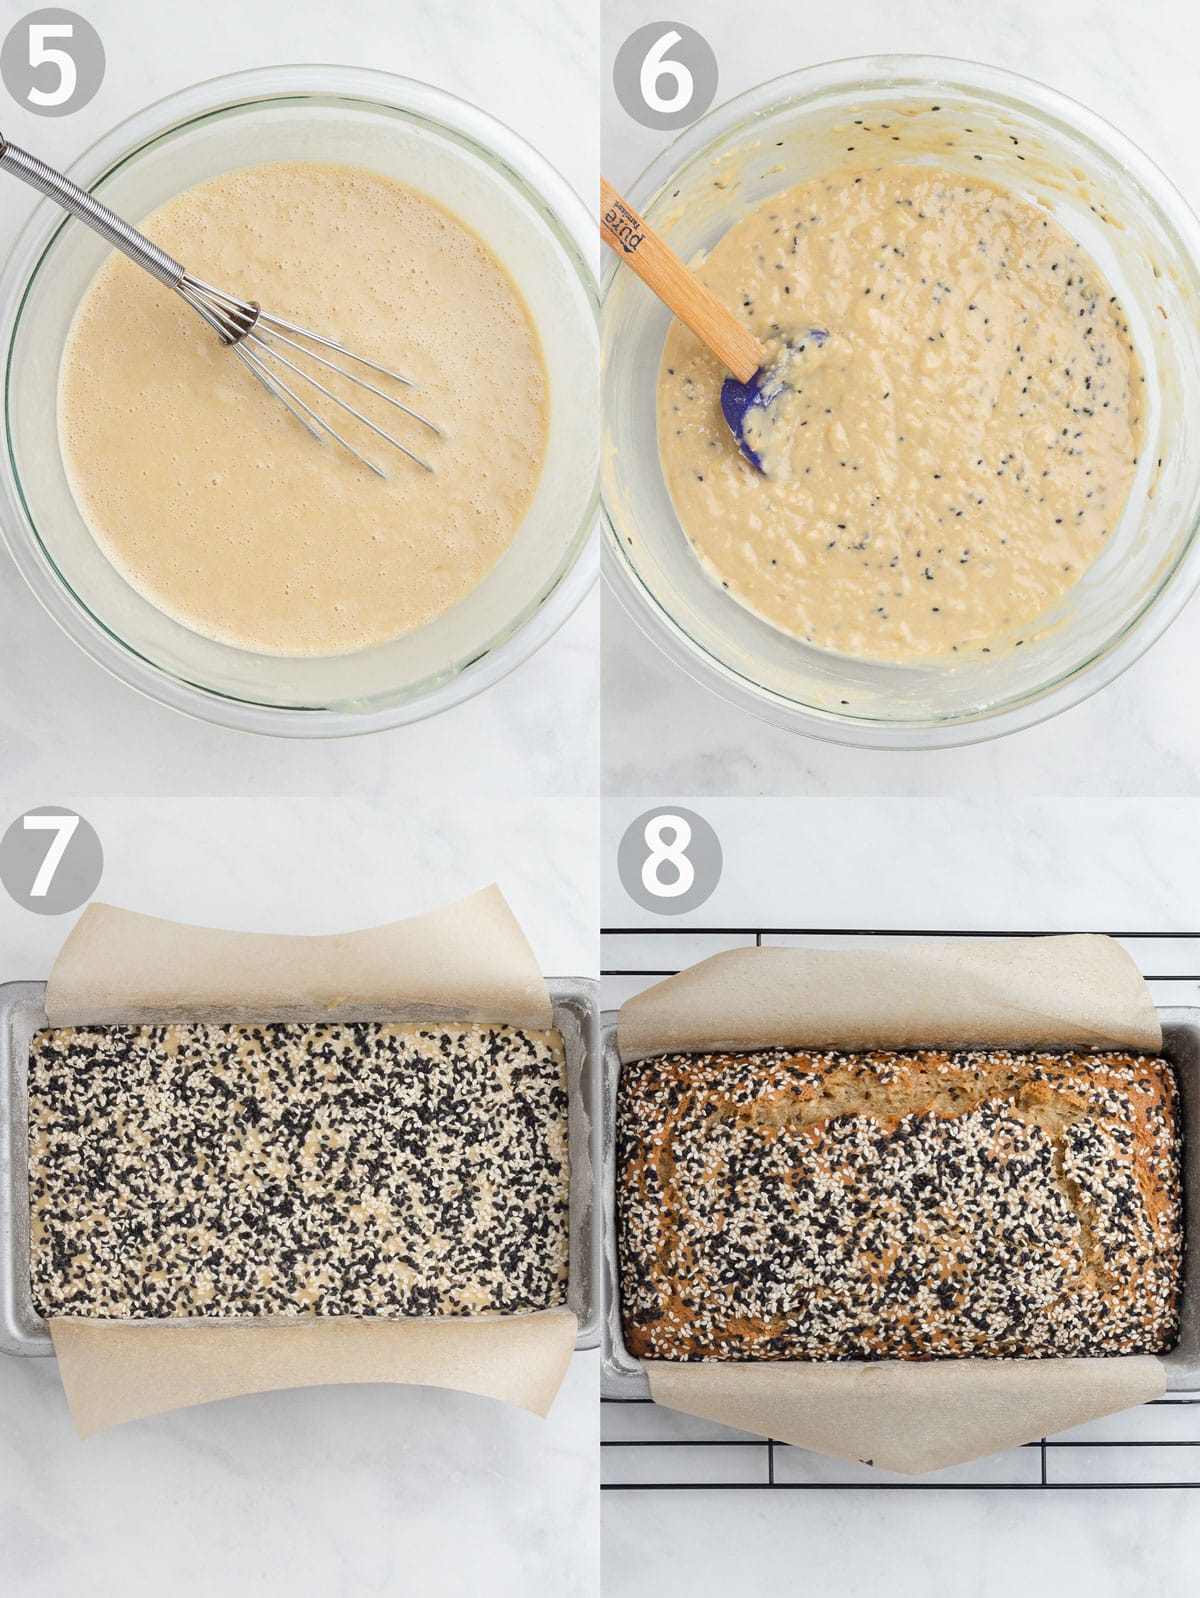 Banana bread steps including combining the wet and dry ingredients and baking the loaf.